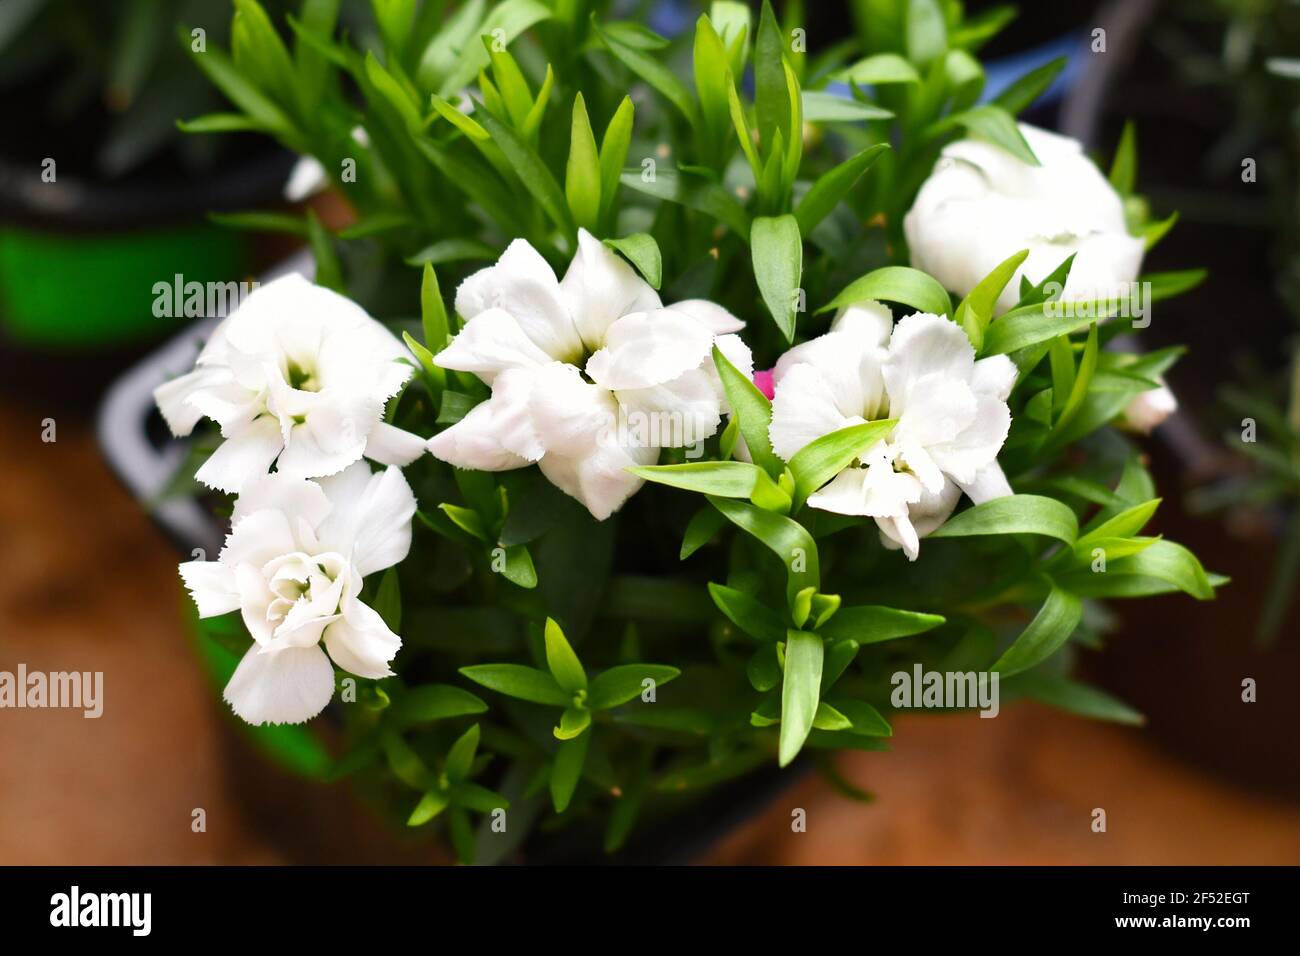 White carnation flowers growing in a pot. Stock Photo